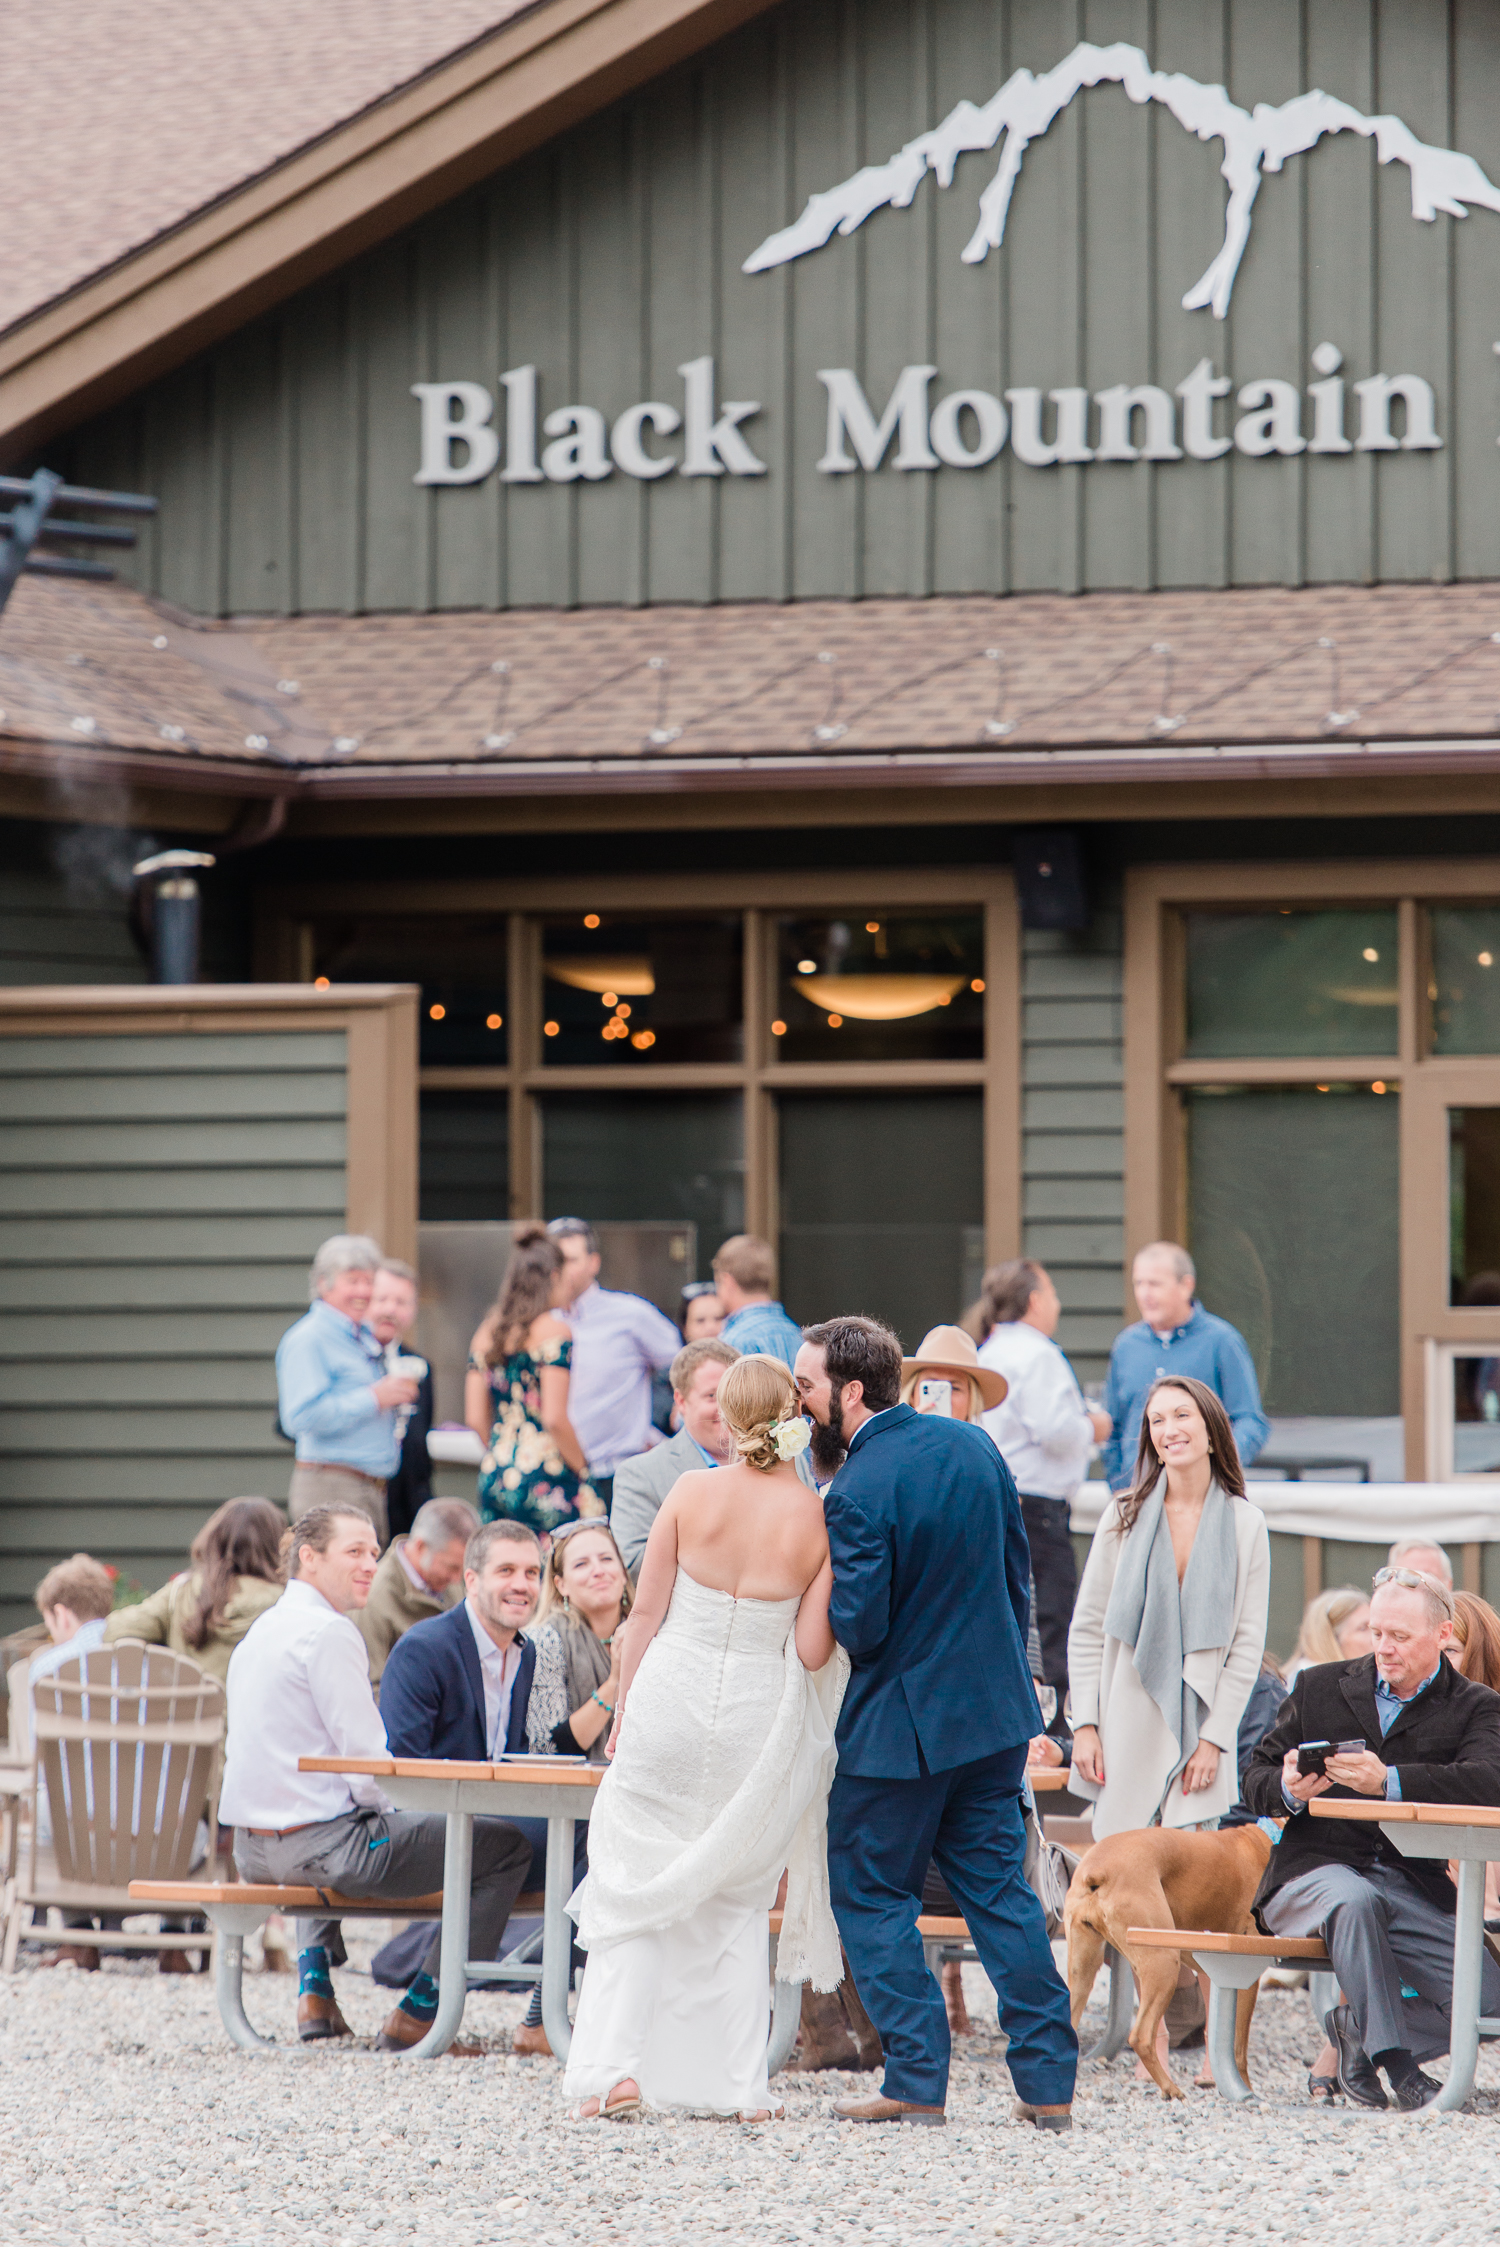  Ashleigh Miller Wedding Photographer captured a summer high alpine mountain wedding at Arapahoe Basin at Black Mountain Lodge in the Colorado mountains. This wedding was filled with dogs, wildflowers, love, mountains and joy! 